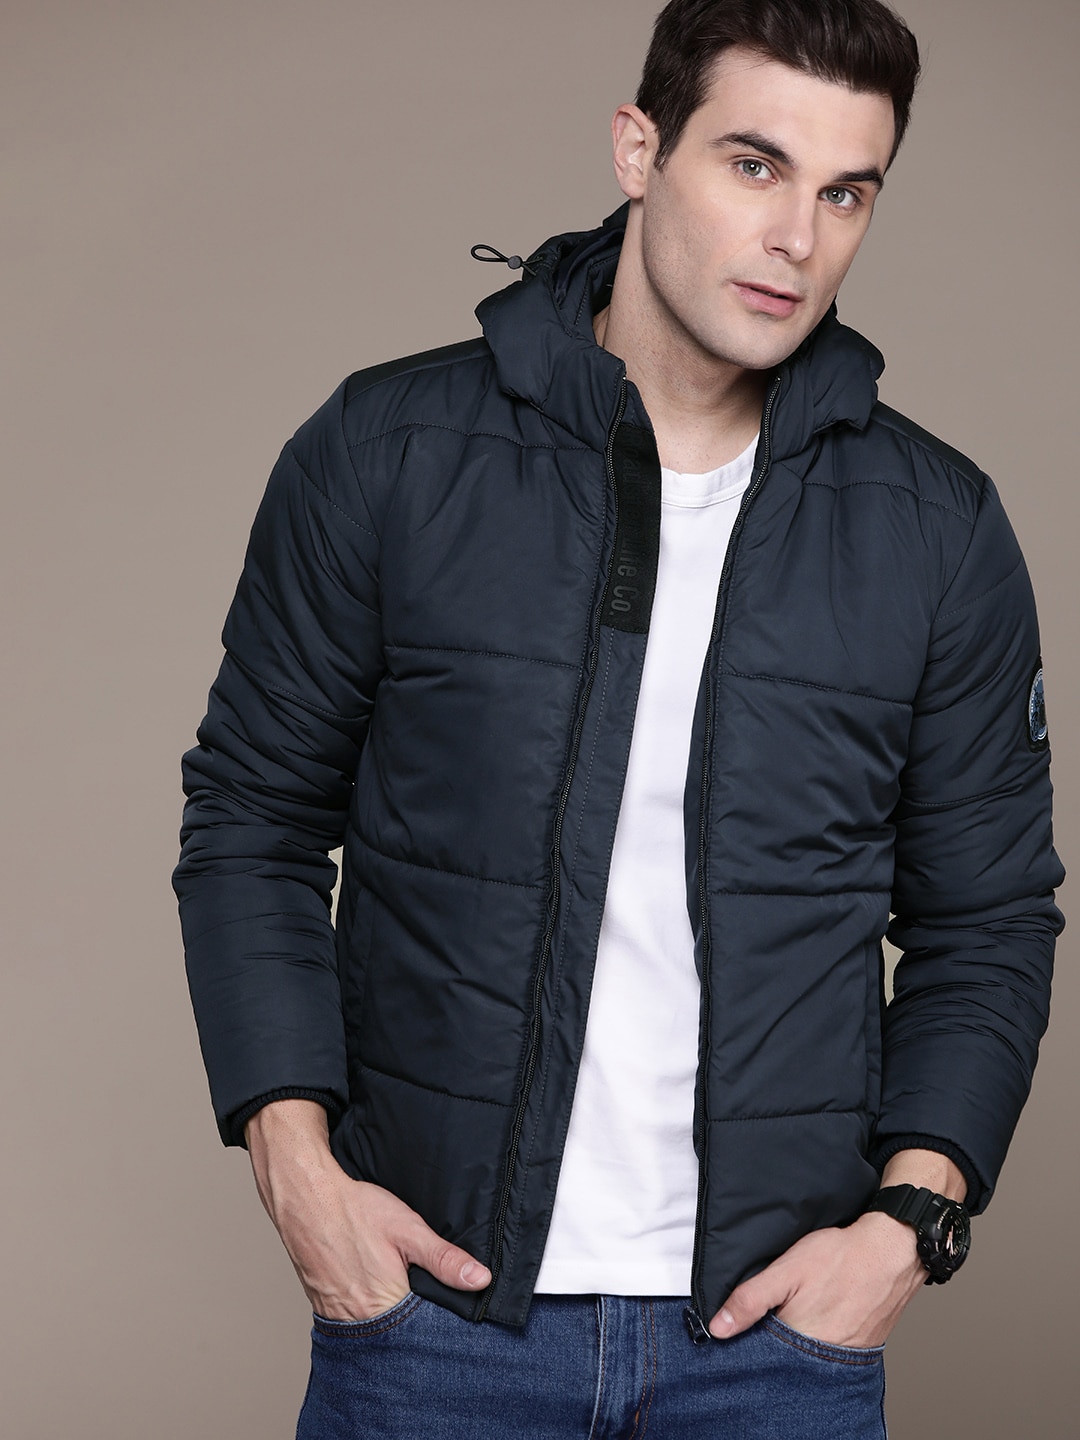 The Roadster Lifestyle Co. Padded Jacket with Patchwork